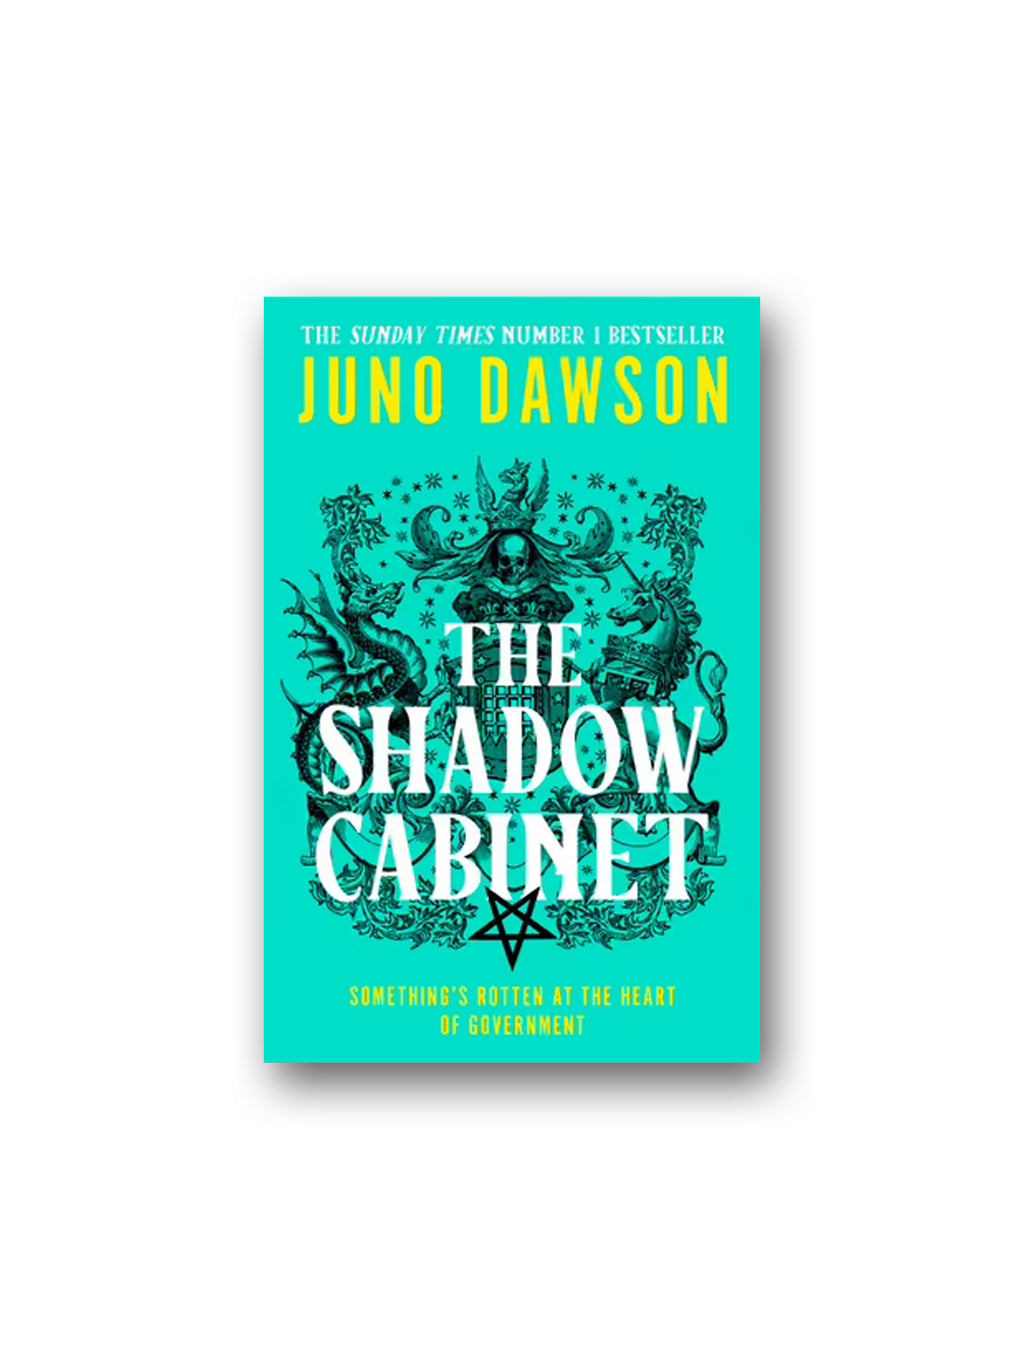 The Shadow Cabinet